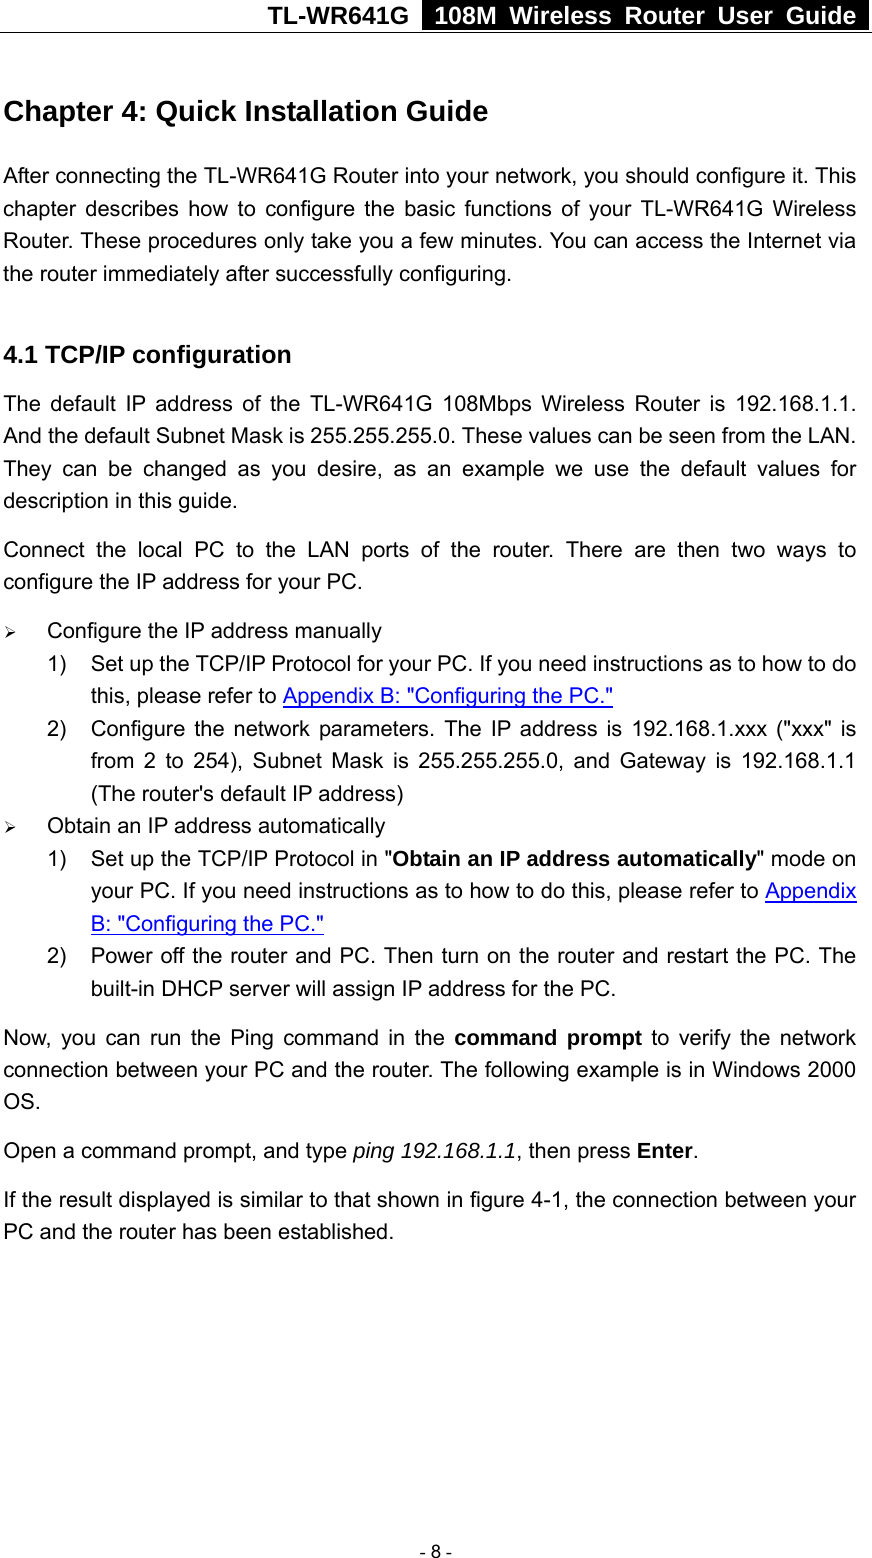 TL-WR641G   108M Wireless Router User Guide  Chapter 4: Quick Installation Guide After connecting the TL-WR641G Router into your network, you should configure it. This chapter describes how to configure the basic functions of your TL-WR641G Wireless Router. These procedures only take you a few minutes. You can access the Internet via the router immediately after successfully configuring.  4.1 TCP/IP configuration The default IP address of the TL-WR641G 108Mbps Wireless Router is 192.168.1.1. And the default Subnet Mask is 255.255.255.0. These values can be seen from the LAN. They can be changed as you desire, as an example we use the default values for description in this guide. Connect the local PC to the LAN ports of the router. There are then two ways to configure the IP address for your PC. ¾ Configure the IP address manually 1)  Set up the TCP/IP Protocol for your PC. If you need instructions as to how to do this, please refer to Appendix B: &quot;Configuring the PC.&quot; 2)  Configure the network parameters. The IP address is 192.168.1.xxx (&quot;xxx&quot; is from 2 to 254), Subnet Mask is 255.255.255.0, and Gateway is 192.168.1.1 (The router&apos;s default IP address) ¾ Obtain an IP address automatically 1)  Set up the TCP/IP Protocol in &quot;Obtain an IP address automatically&quot; mode on your PC. If you need instructions as to how to do this, please refer to Appendix B: &quot;Configuring the PC.&quot; 2)  Power off the router and PC. Then turn on the router and restart the PC. The built-in DHCP server will assign IP address for the PC. Now, you can run the Ping command in the command prompt to verify the network connection between your PC and the router. The following example is in Windows 2000 OS. Open a command prompt, and type ping 192.168.1.1, then press Enter. If the result displayed is similar to that shown in figure 4-1, the connection between your PC and the router has been established.    - 8 - 